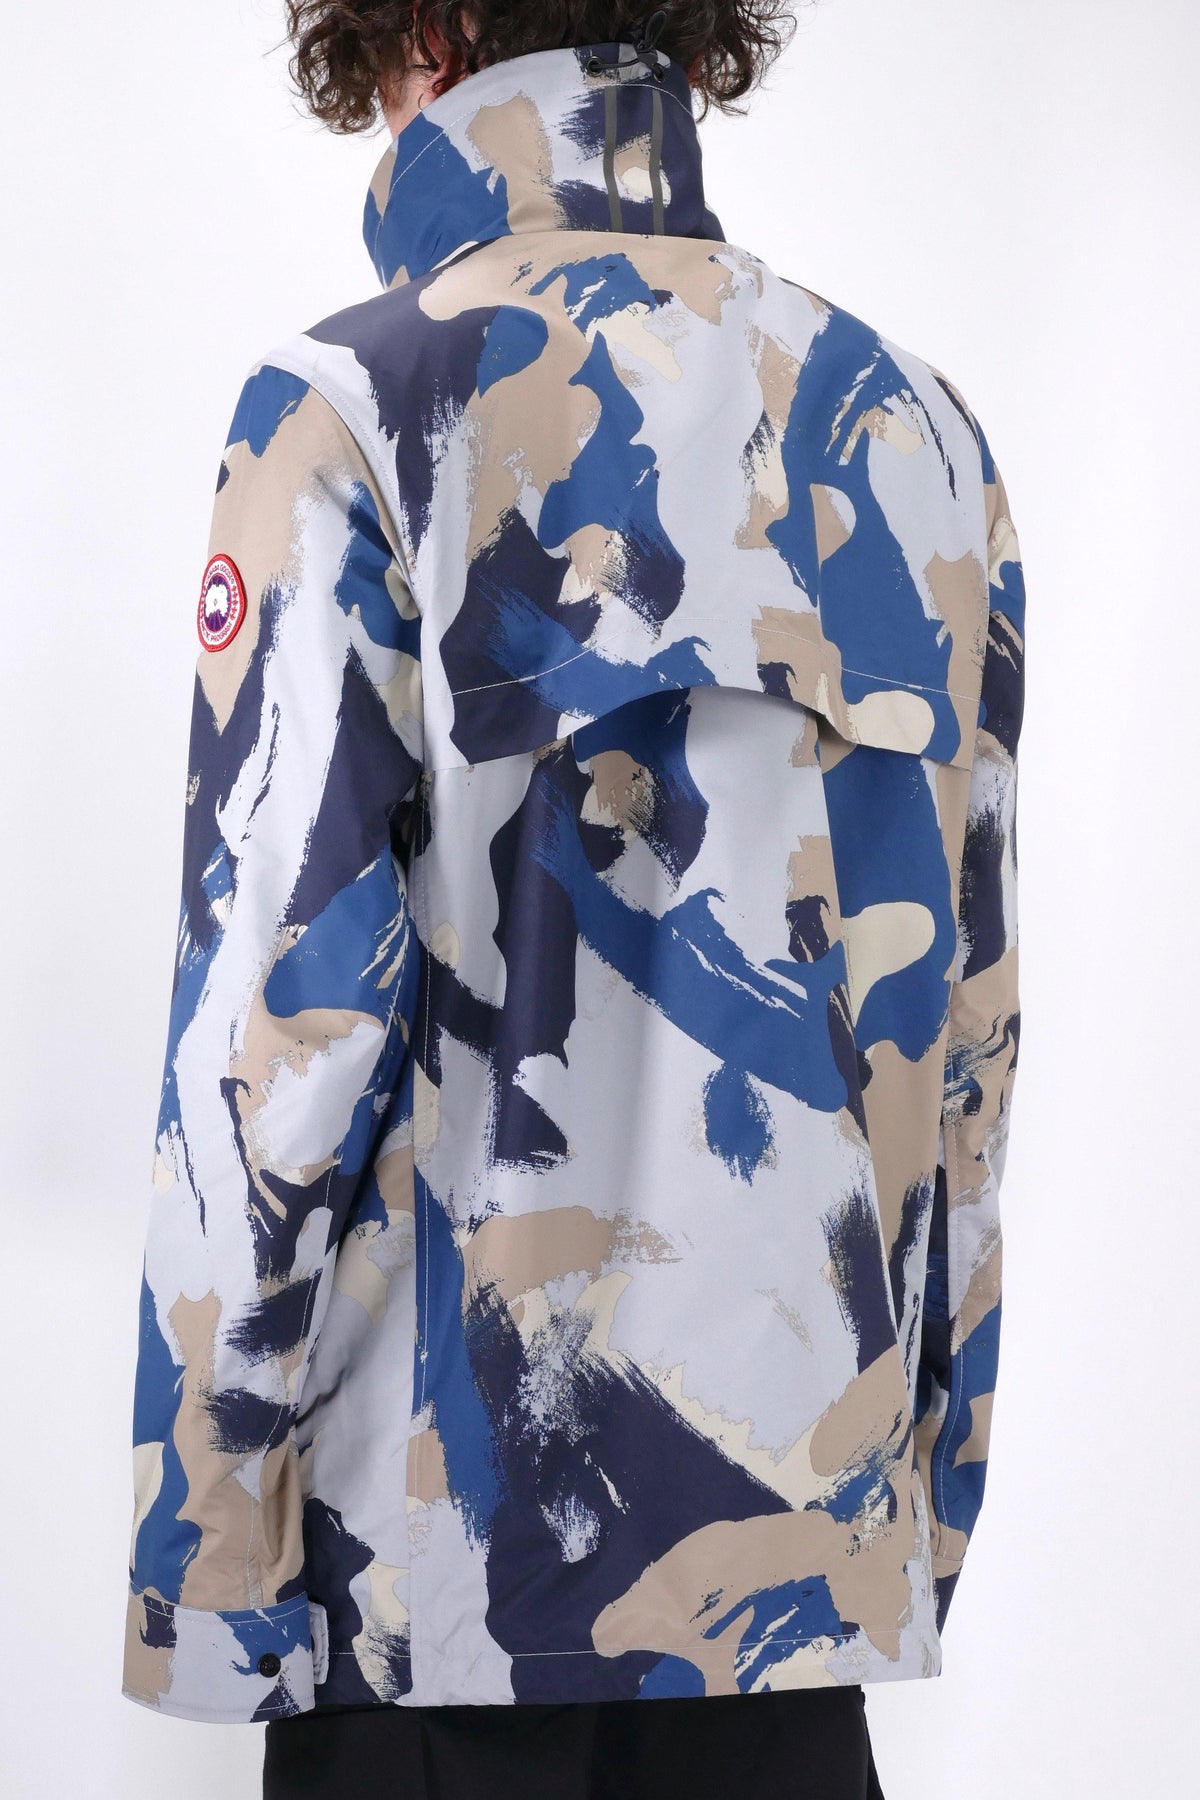 Canada Goose Mens Wind Jacket Stanhope - Camo Print - Due West